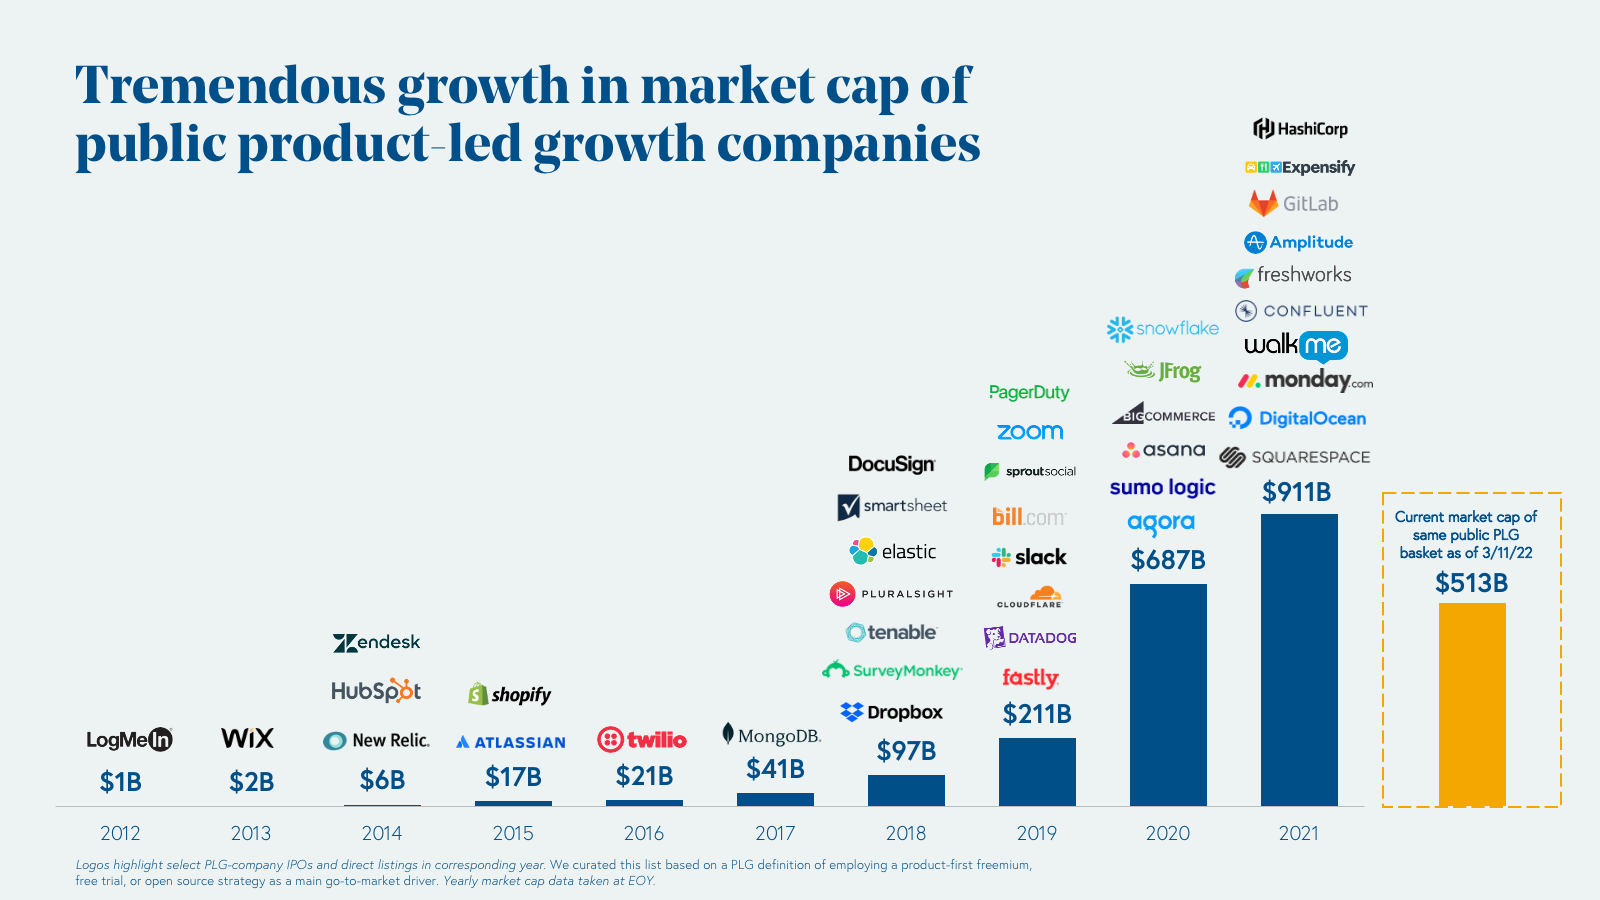 Tremdendous growth in market cap of public product-led growth companies